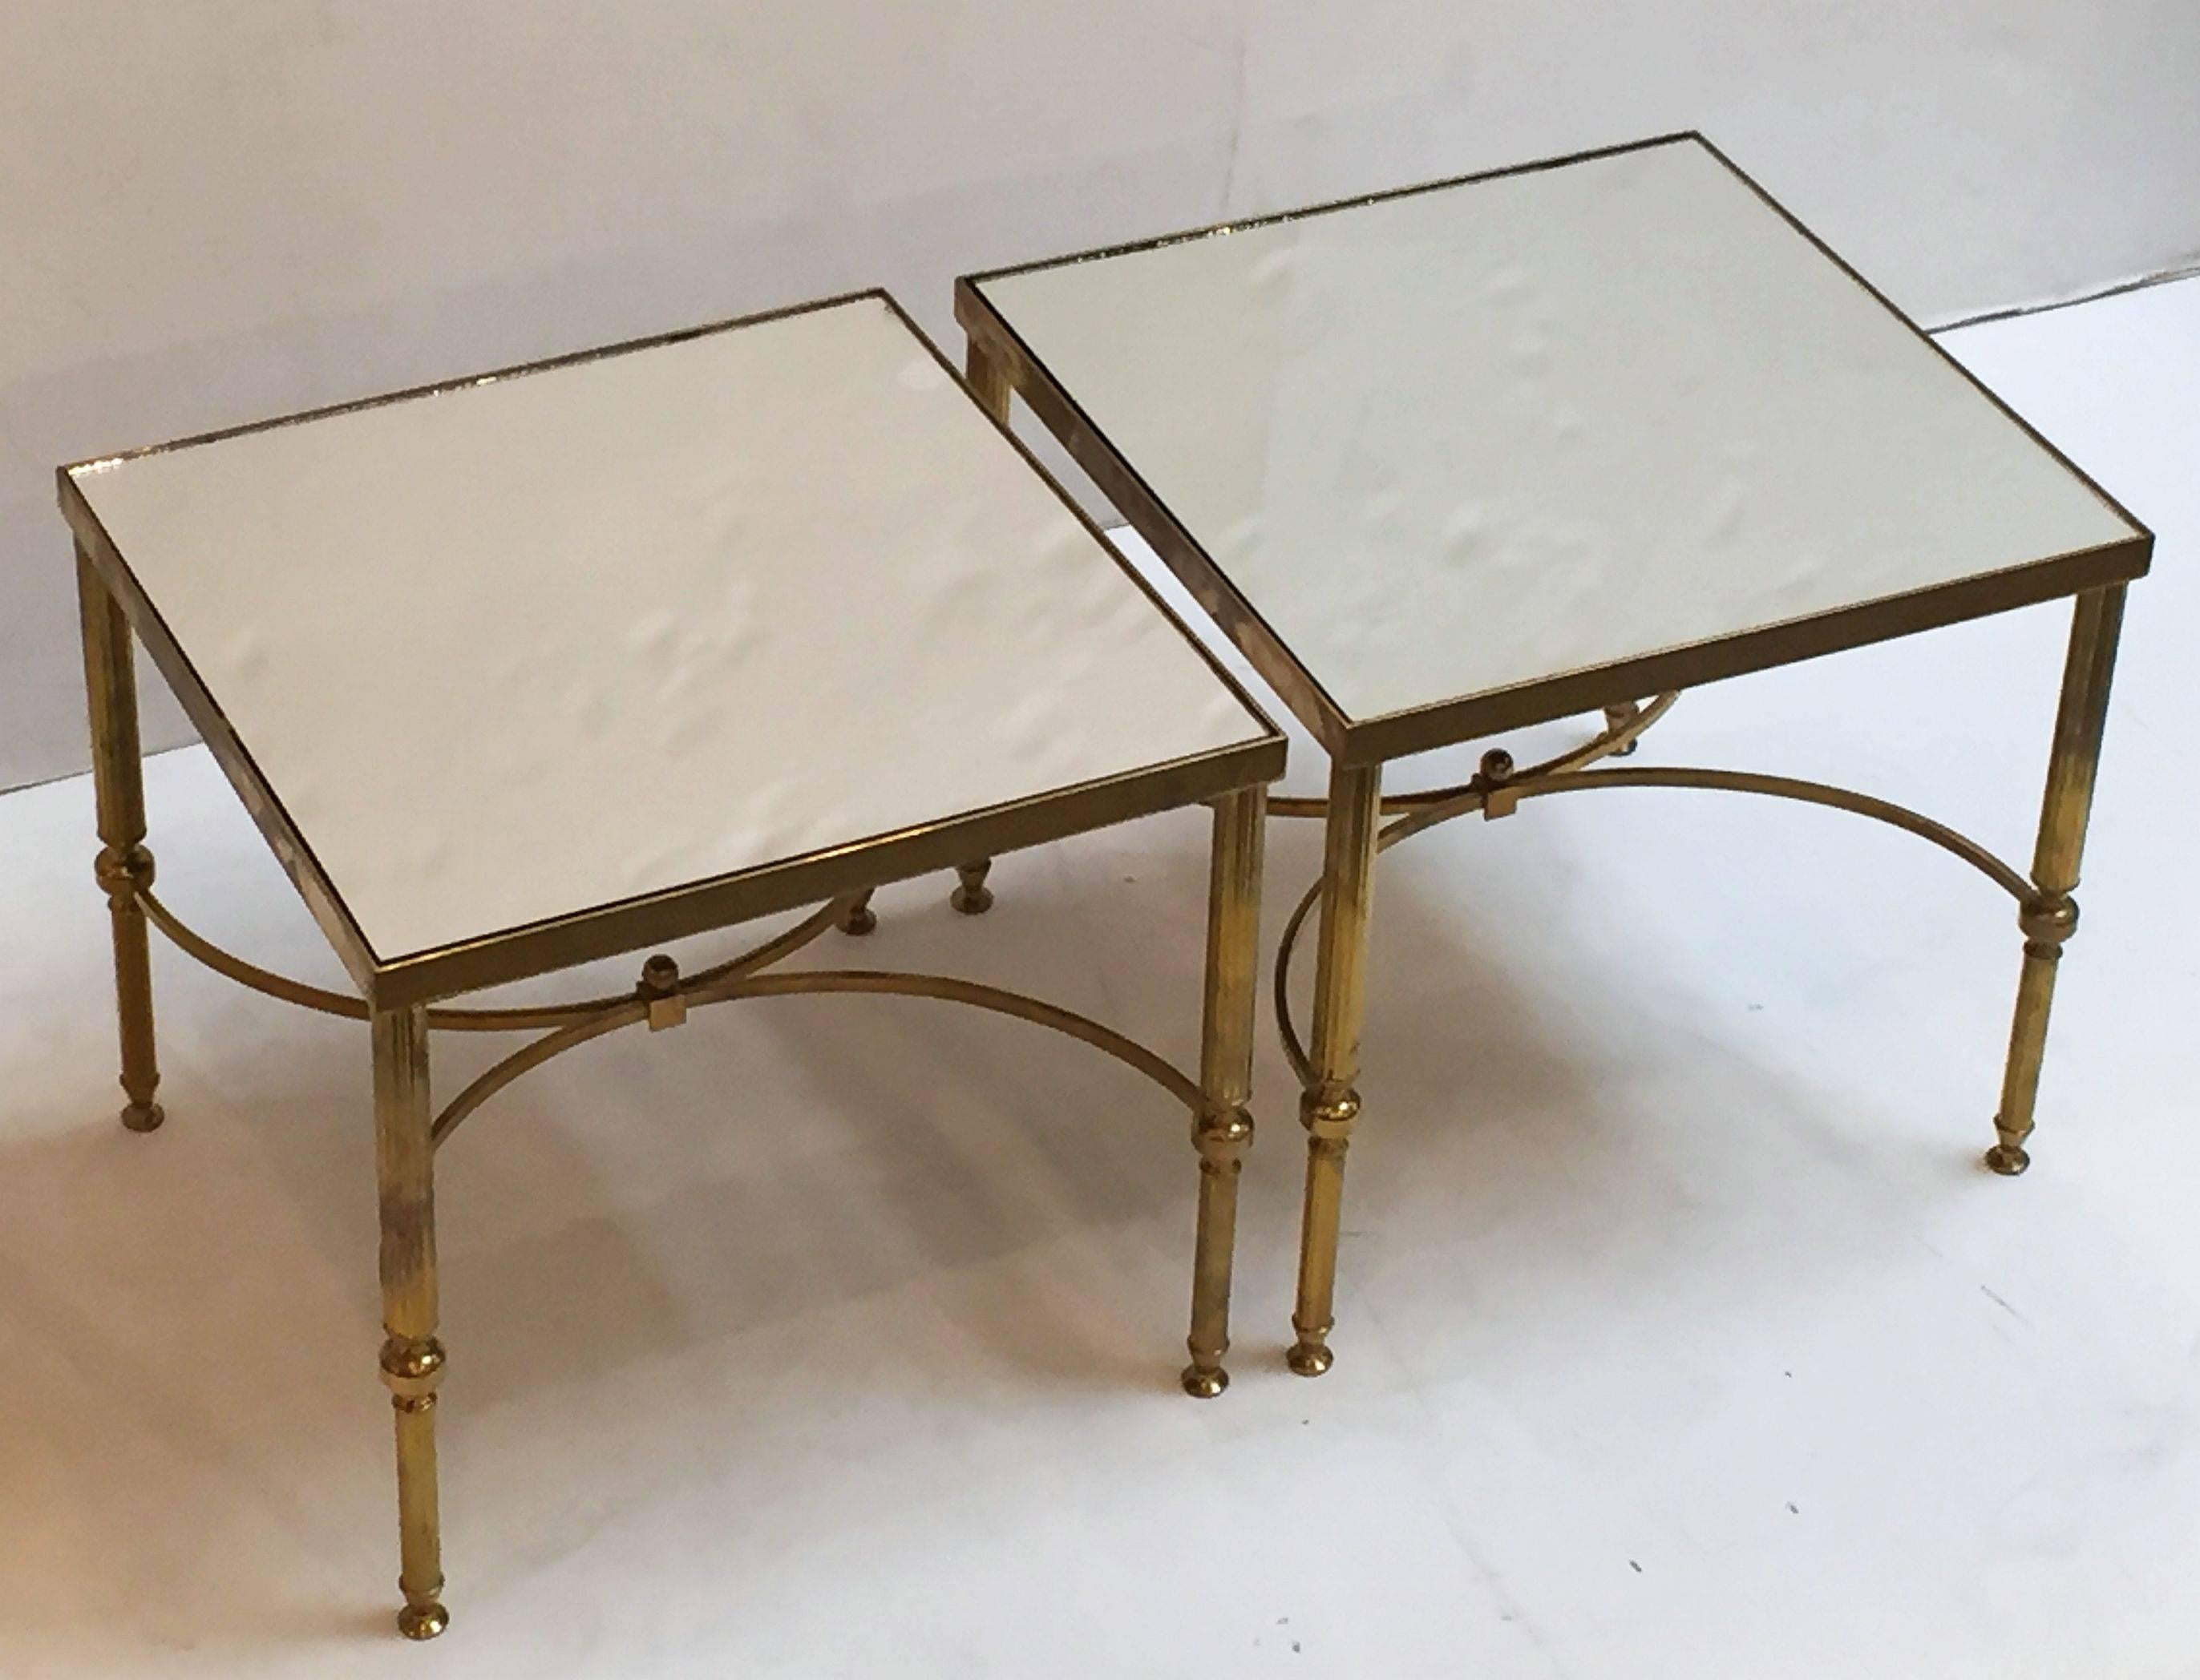 A fine pair of square French low side or end tables of brass with mirrored glass tops, opposing demilune stretchers and reeded, tapering legs.

Individually priced - $1595 each table.